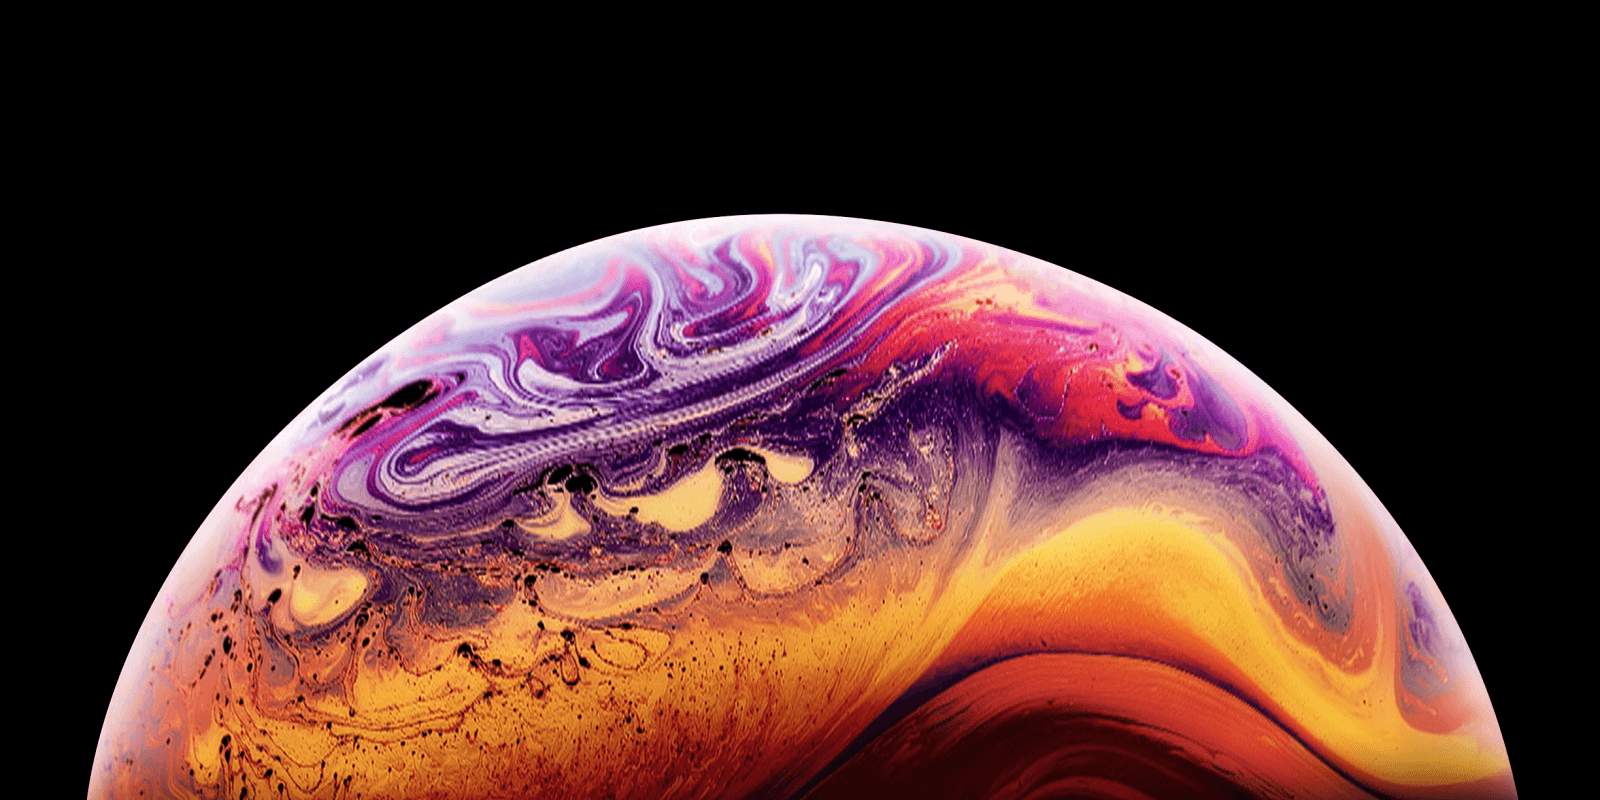 Download the wallpaper from the leaked iPhone XS image right here